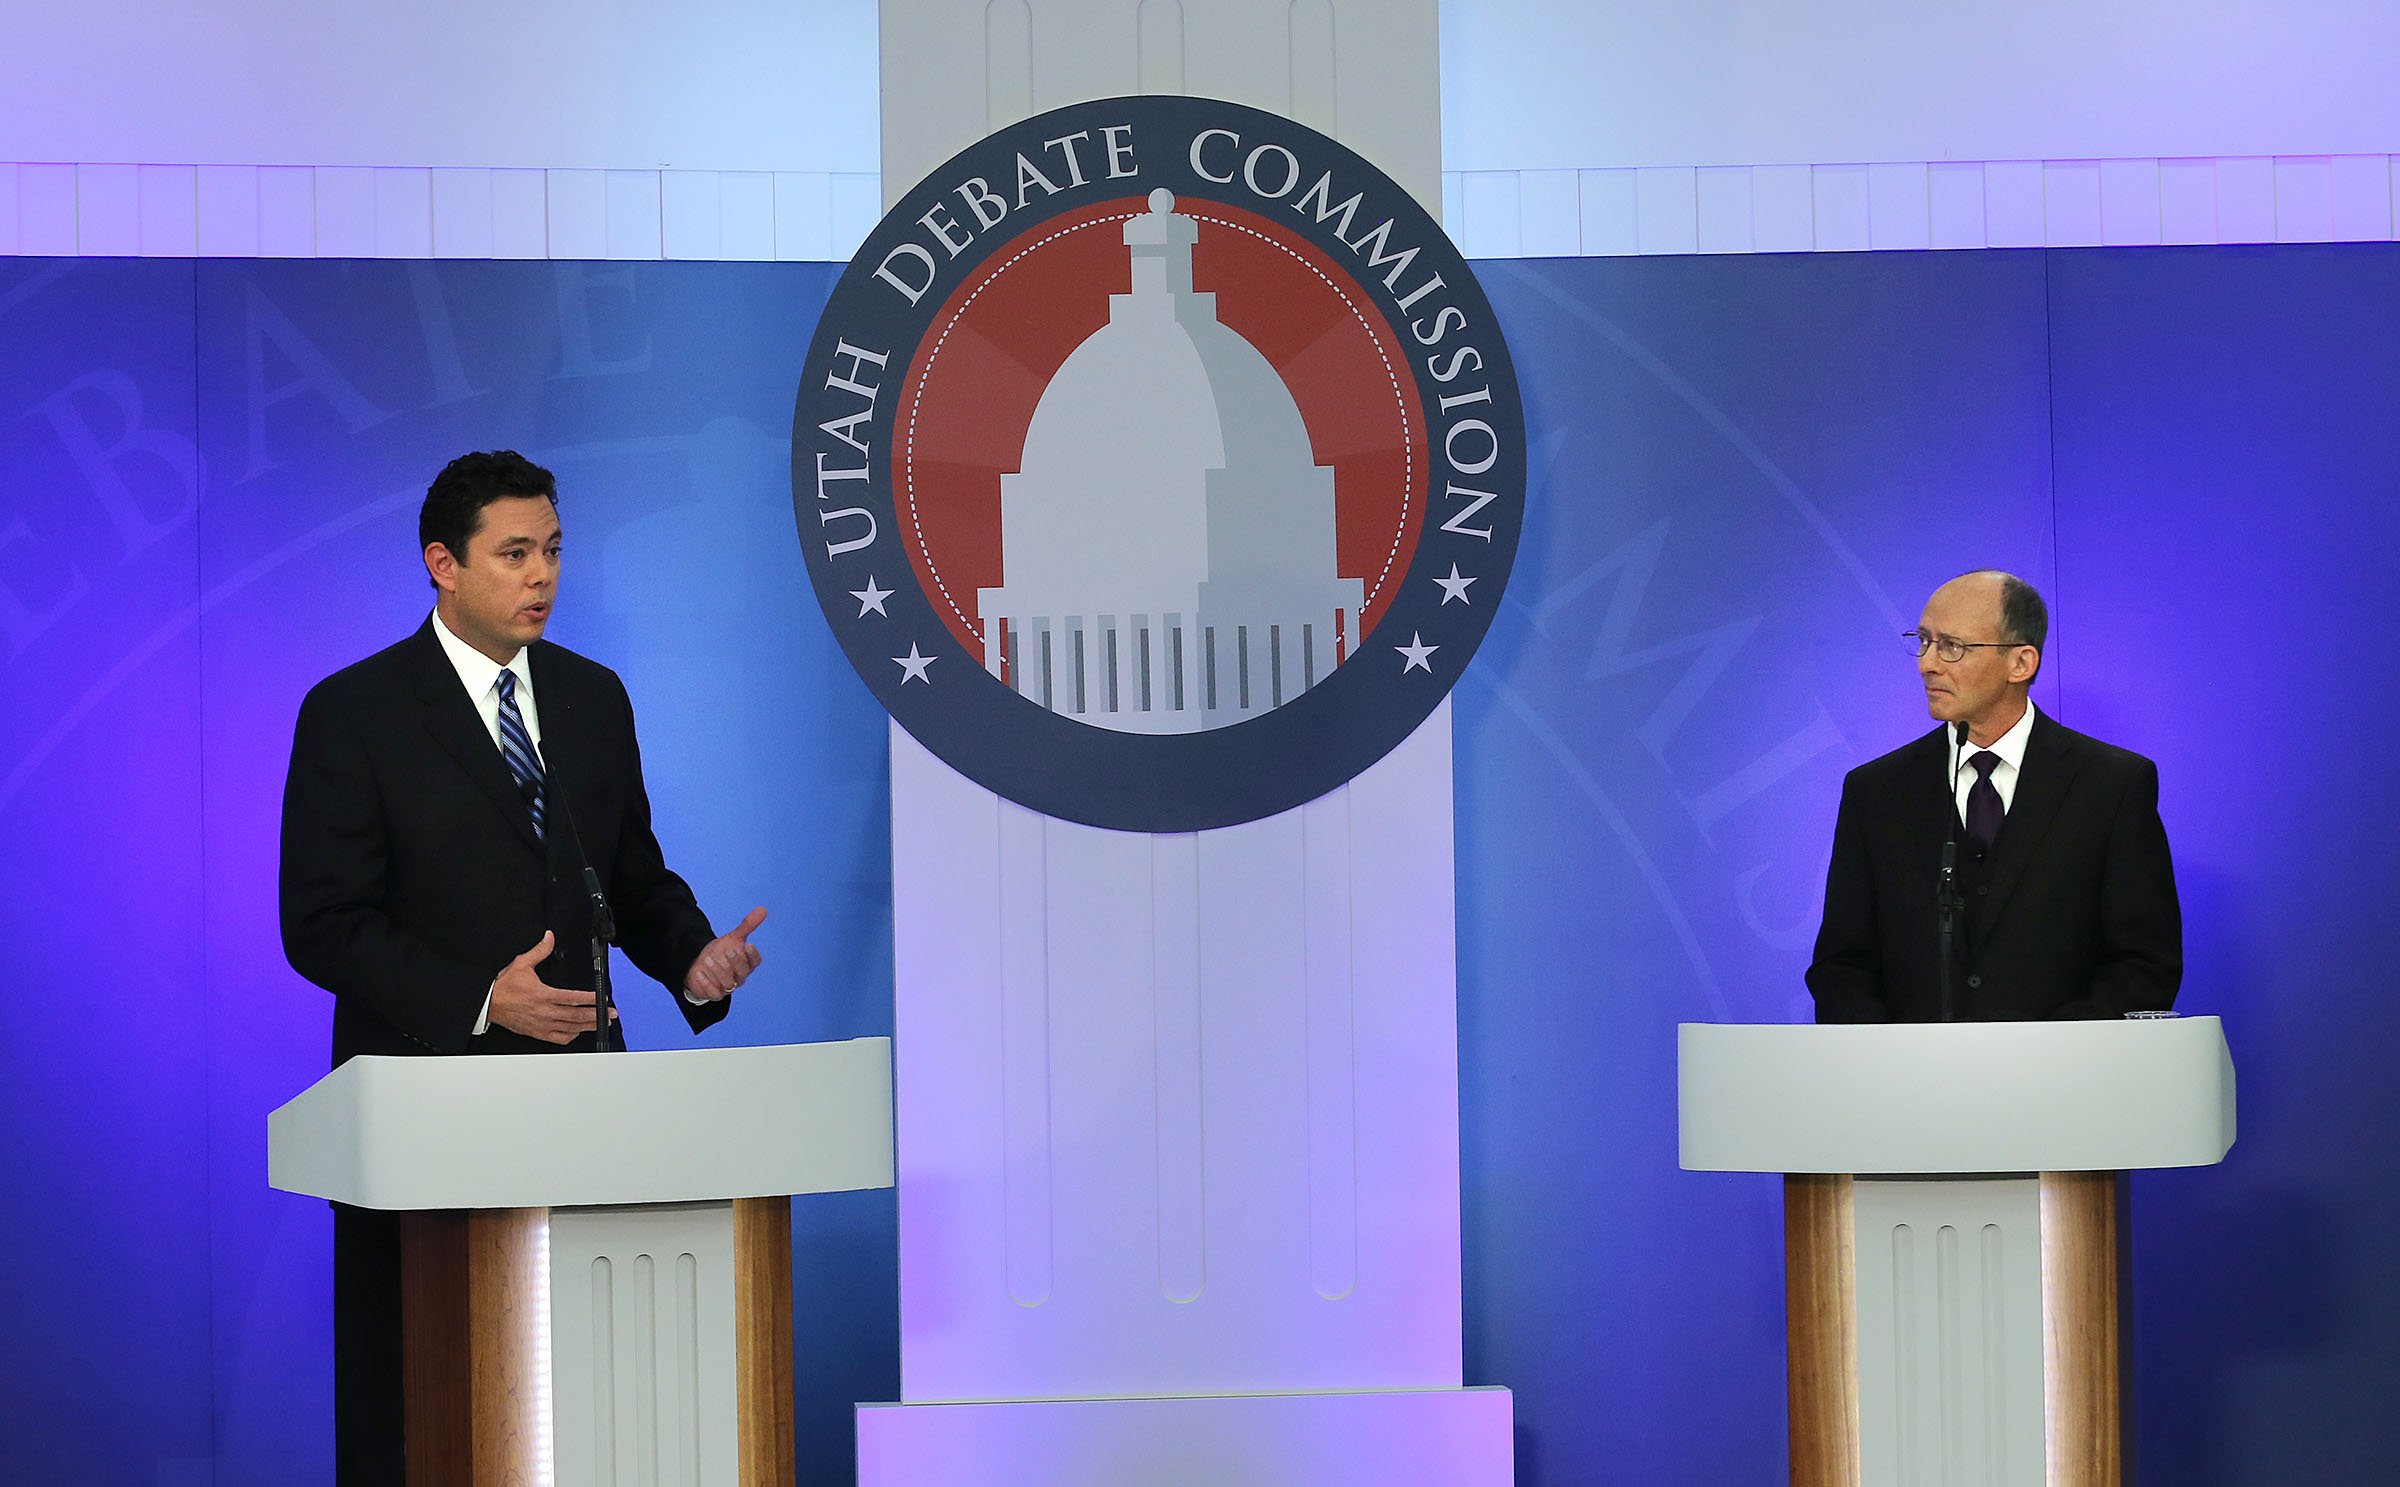 Rep. Jason Chaffetz and his Democratic challenger Brian Wonnacott   debate for the 3rd Congressional District  election at Utah Valley University Tuesday, Oct. 7, 2014, in Orem. (Credit: Tom Smart, Deseret News)